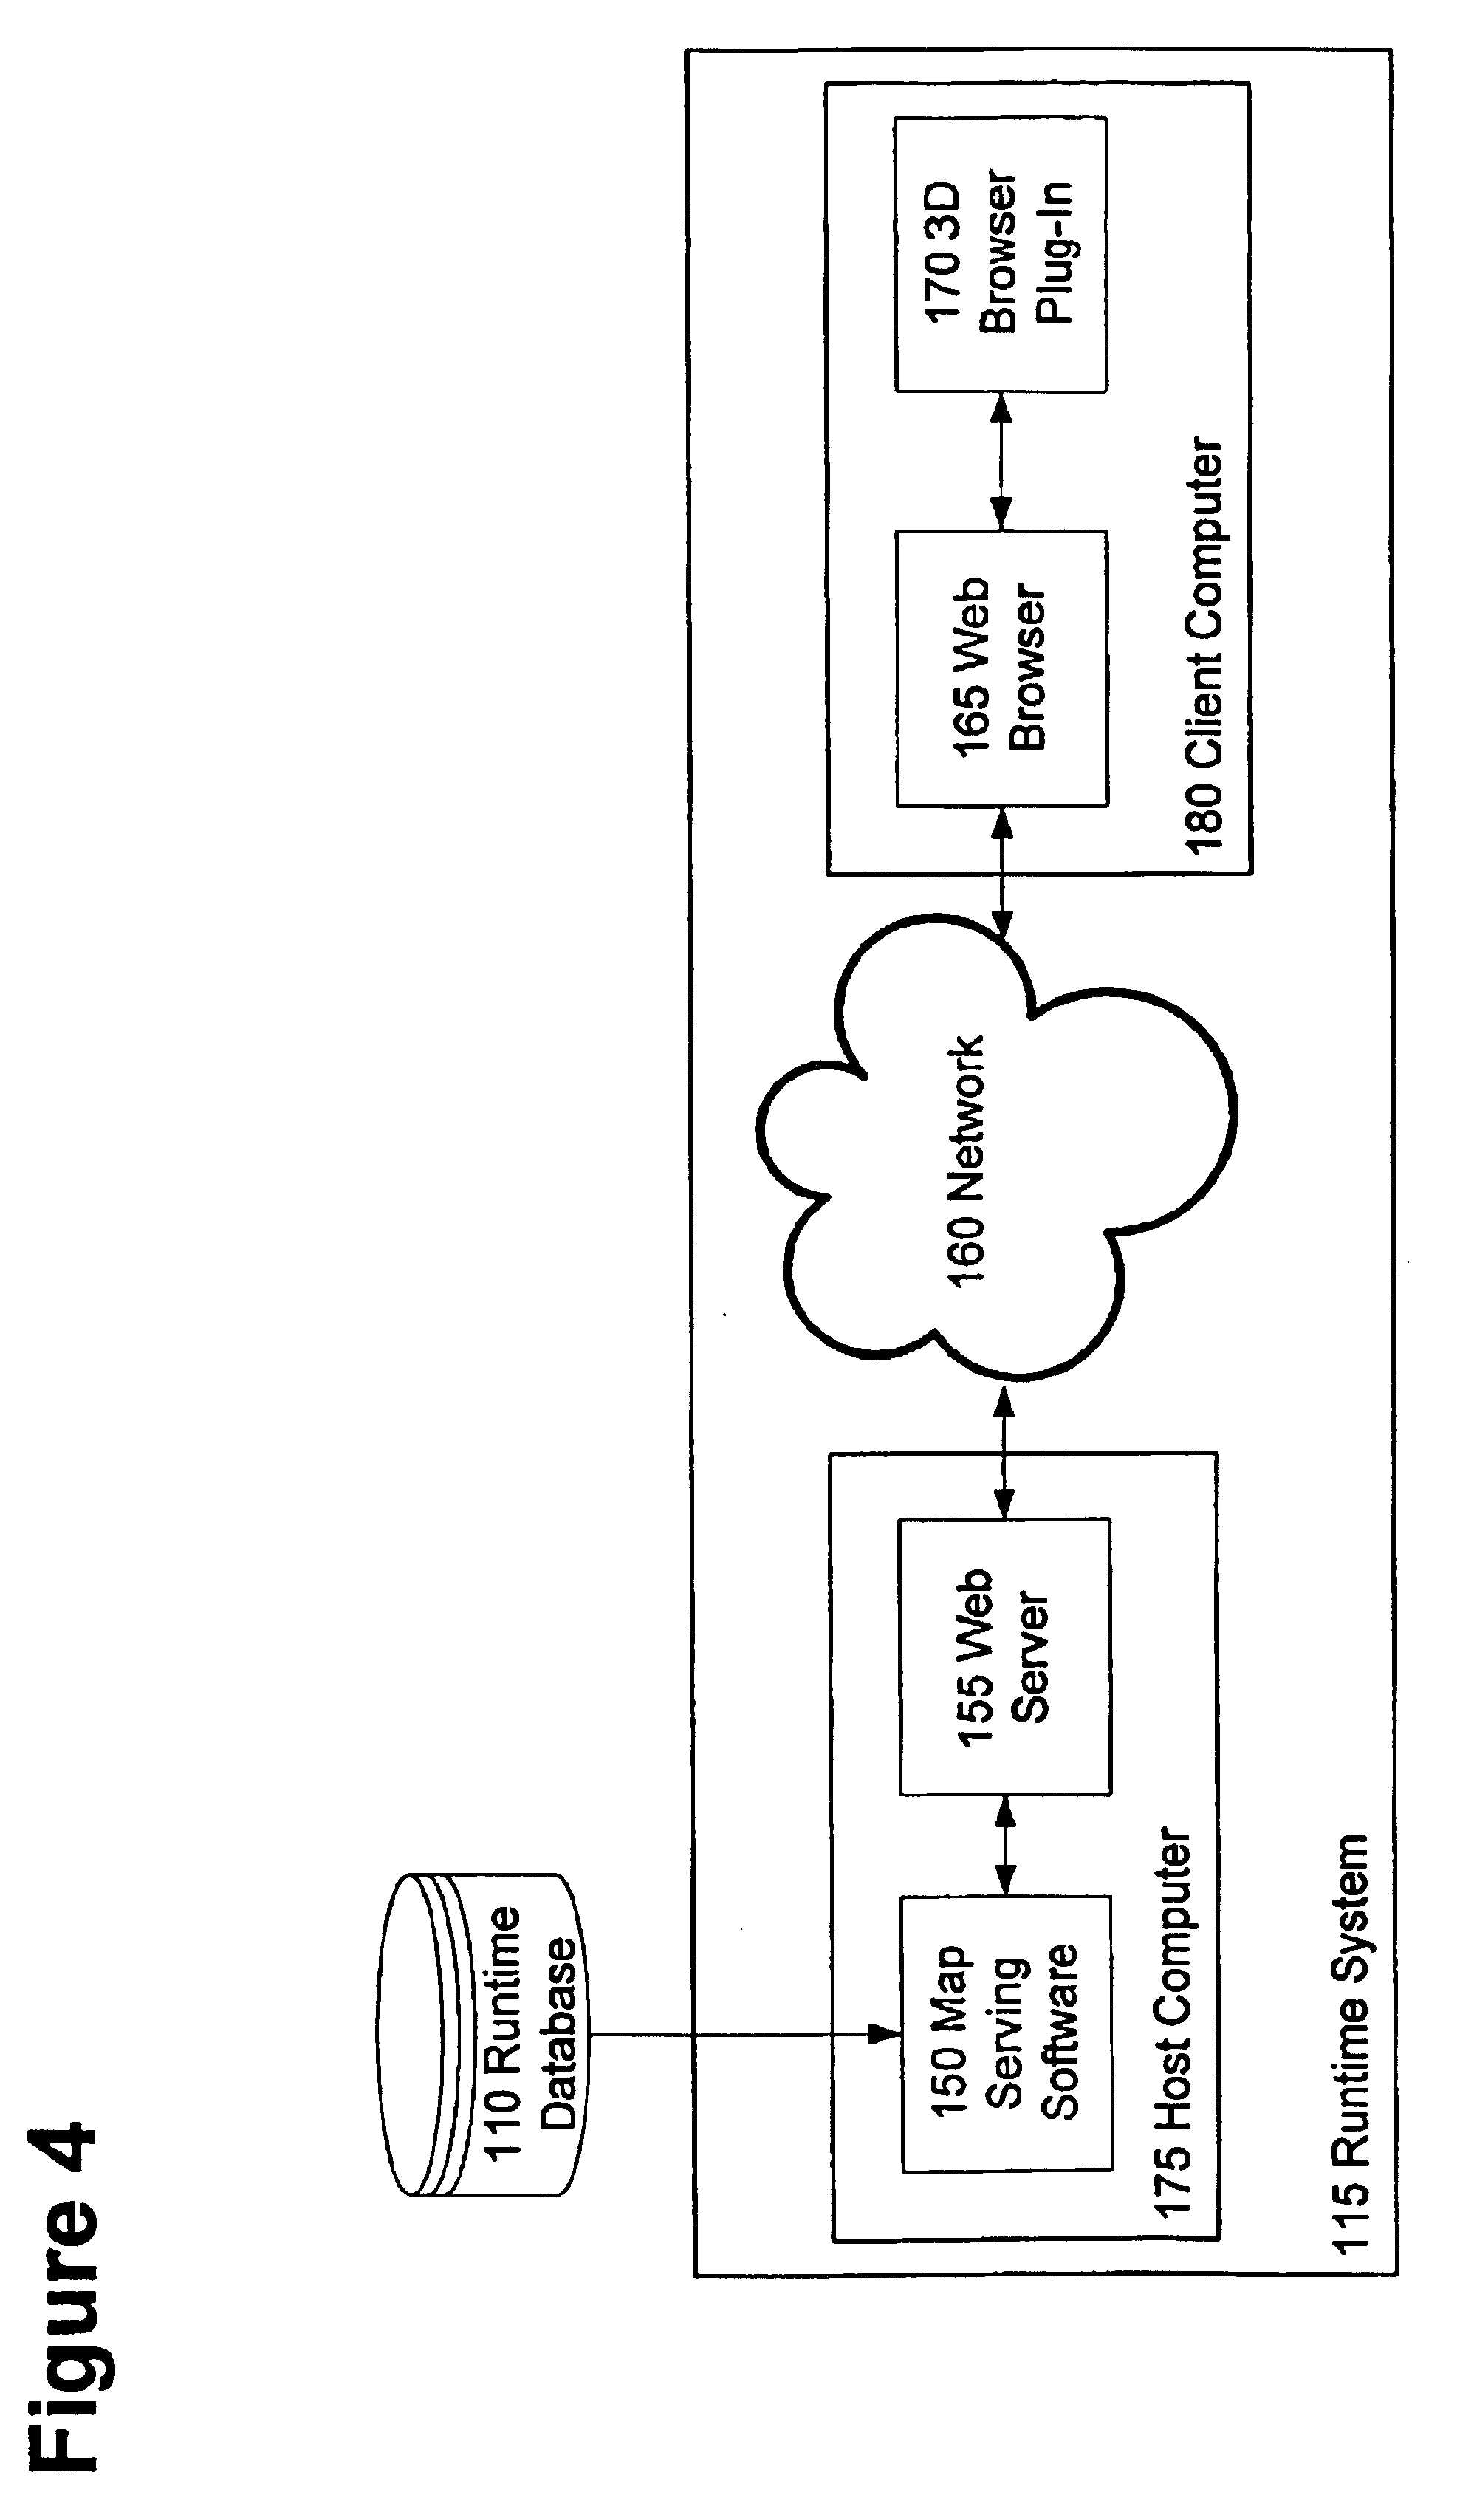 Method for describing objects in a virtual space